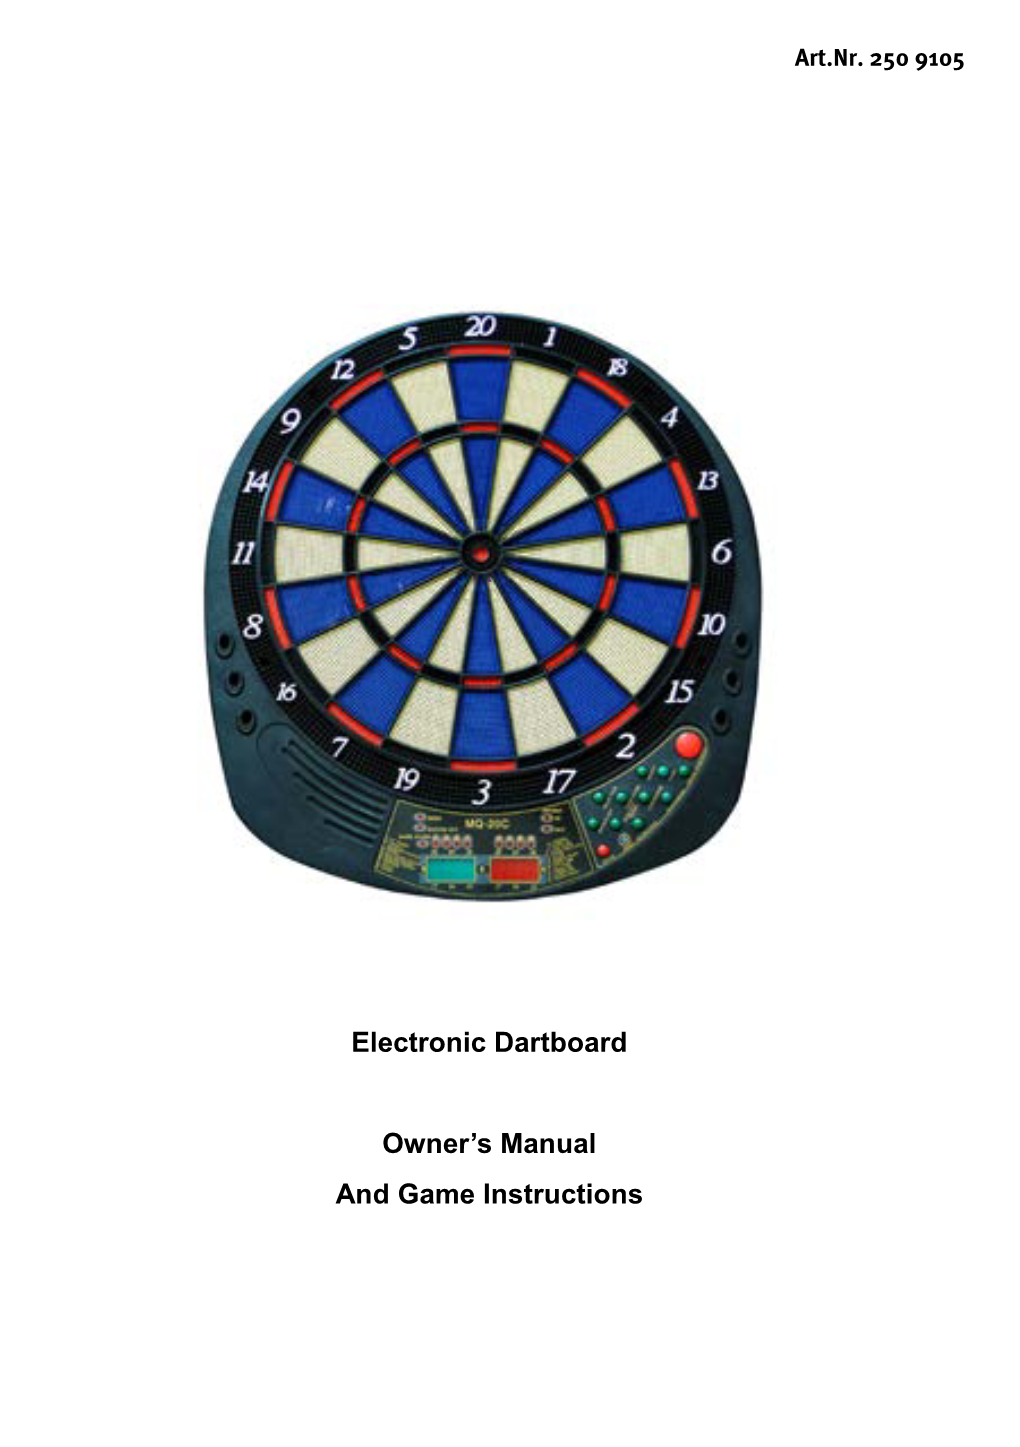 Electronic Dartboard Owner's Manual and Game Instructions